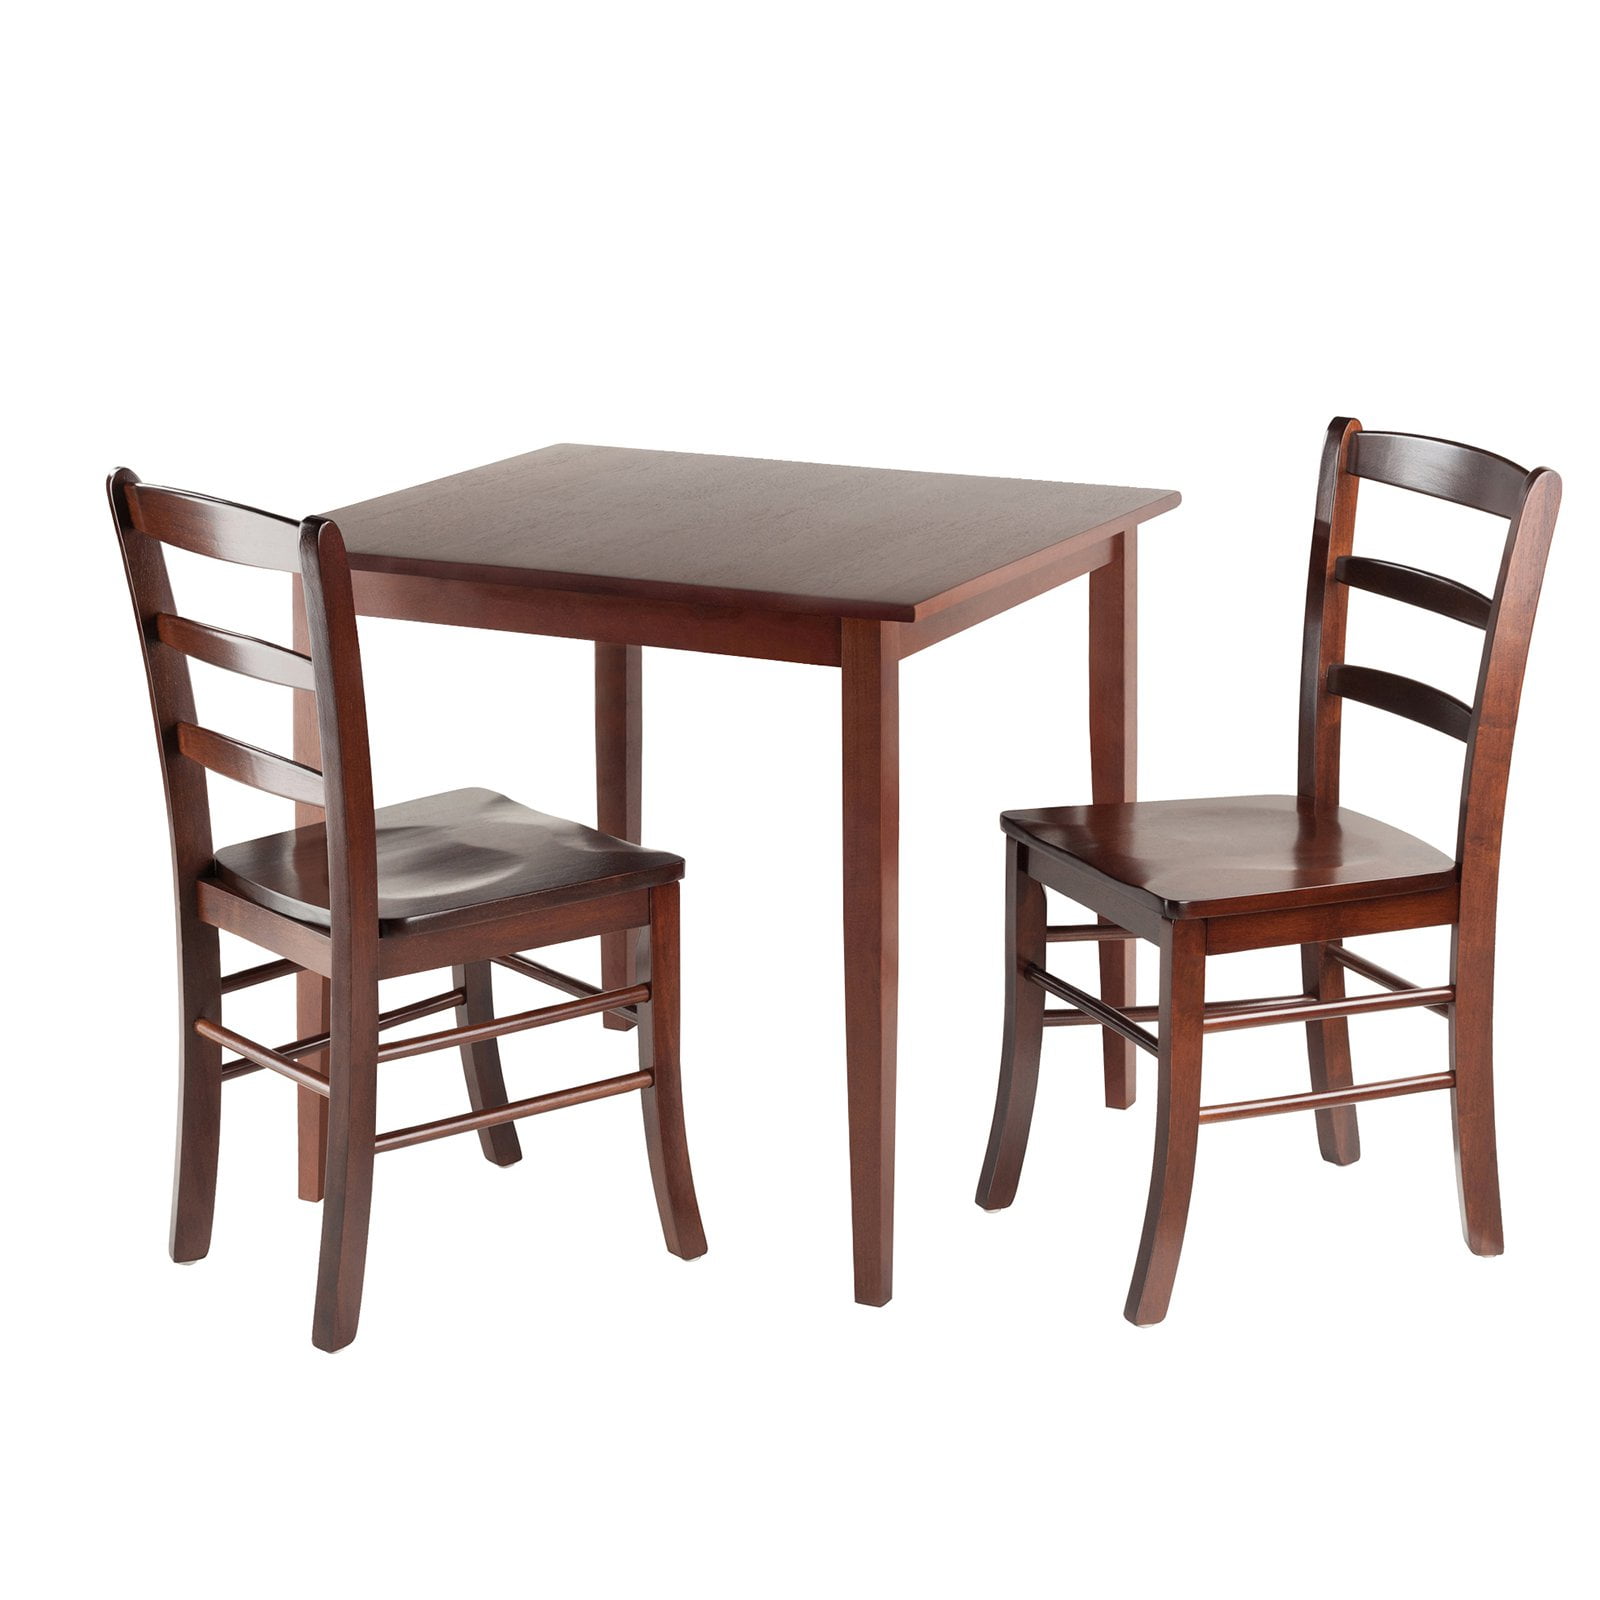 Winsome Groveland Square Dining Table With 2 Chairs 3 Piece